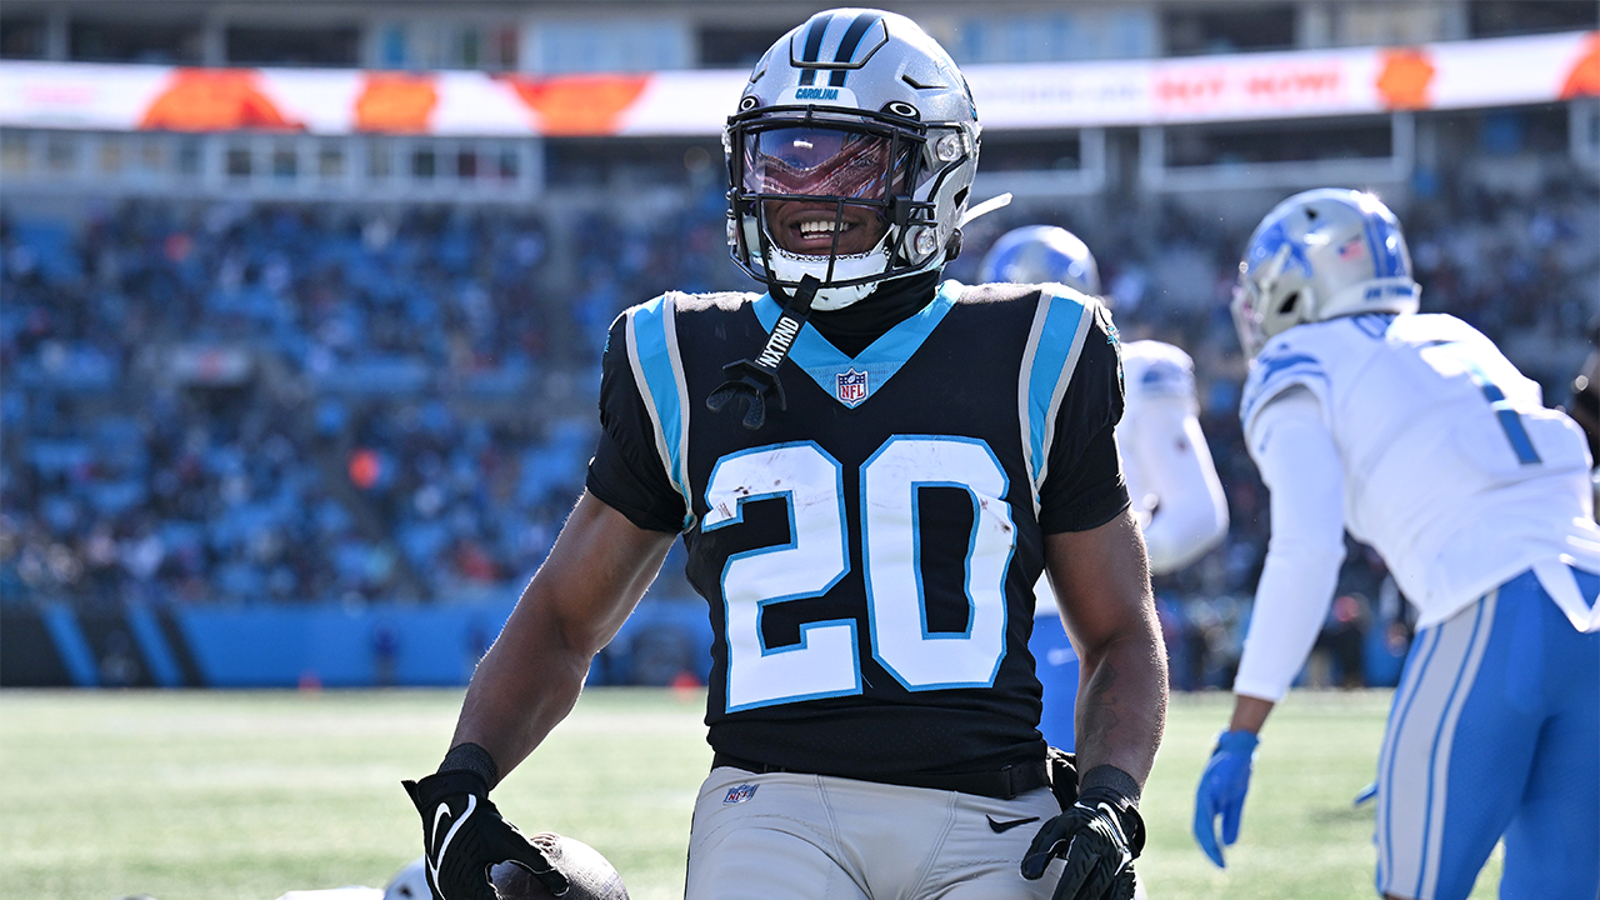 The Panthers pile up 320 rushing yards in the win over the Lions